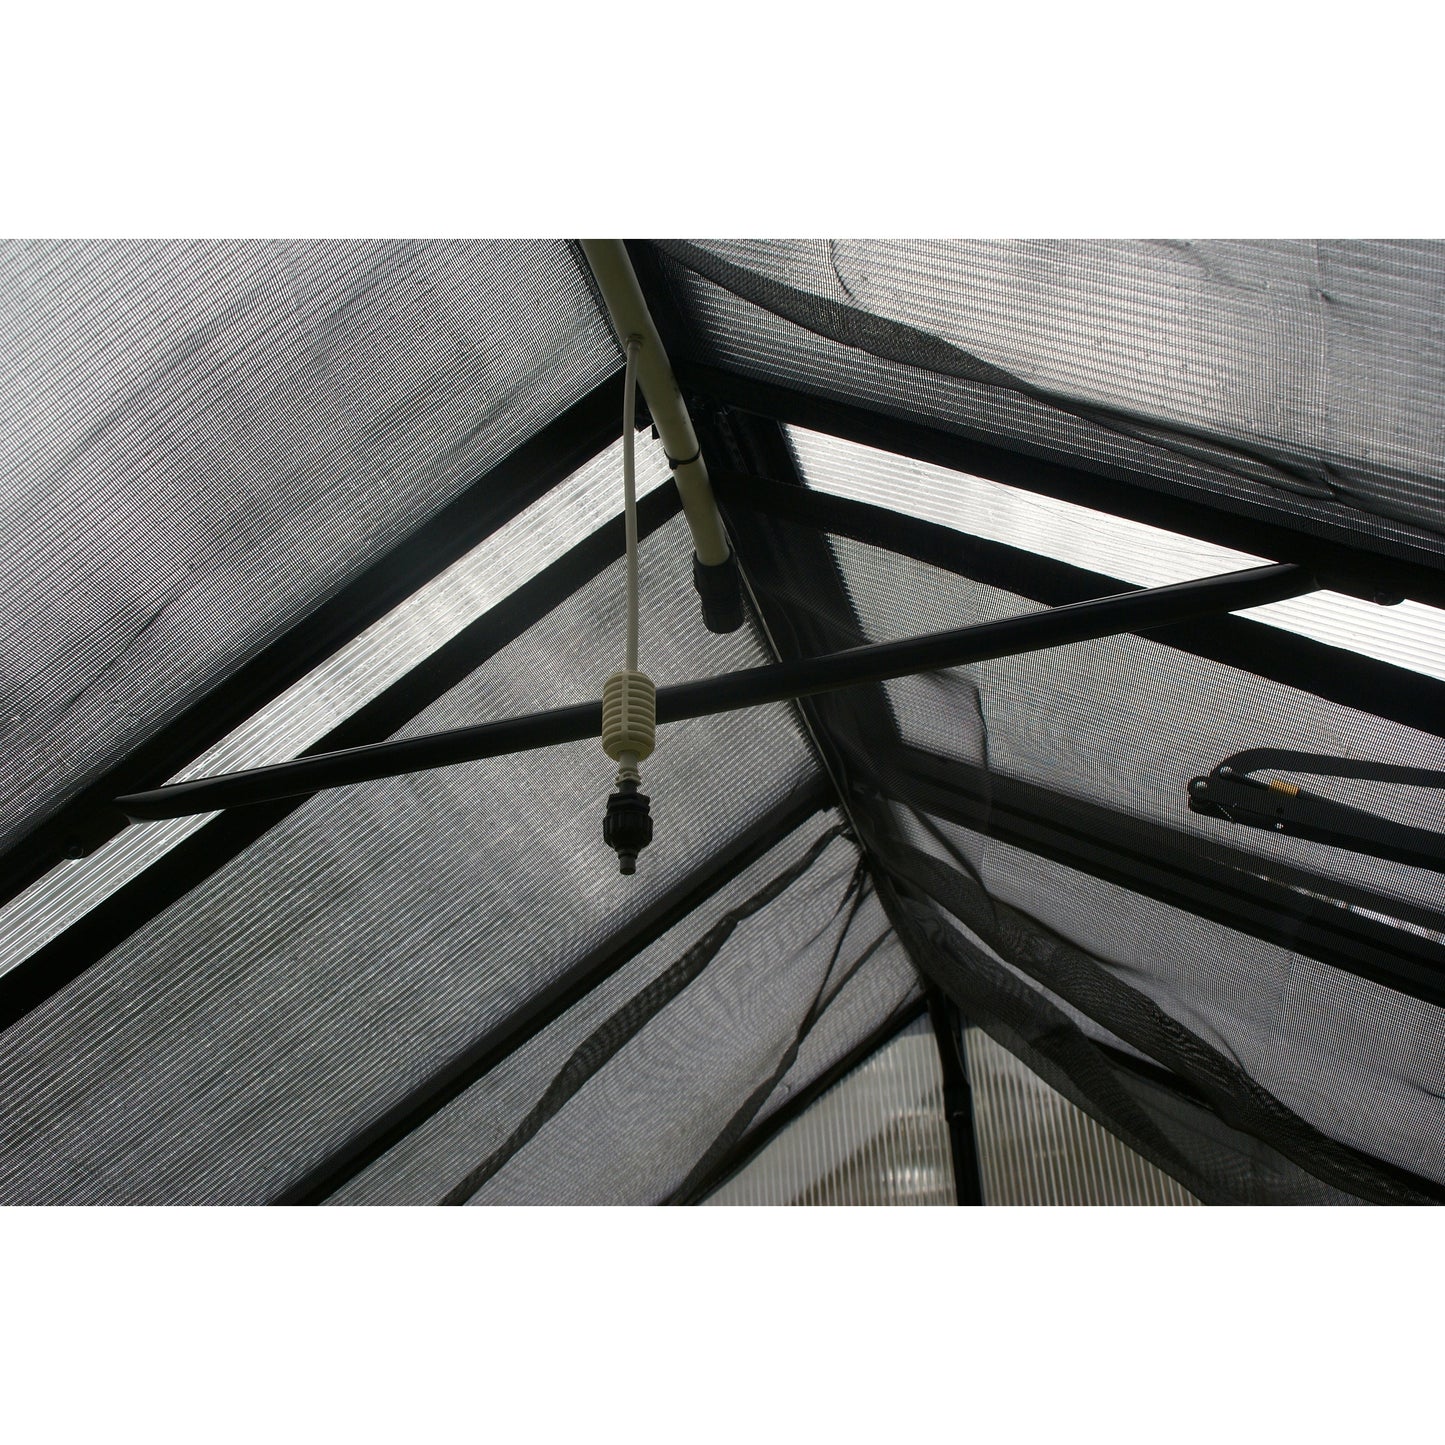 Mont Growers Edition Greenhouse 8FTx 24FT - Black Finish MONT-24-BK-GROWERS